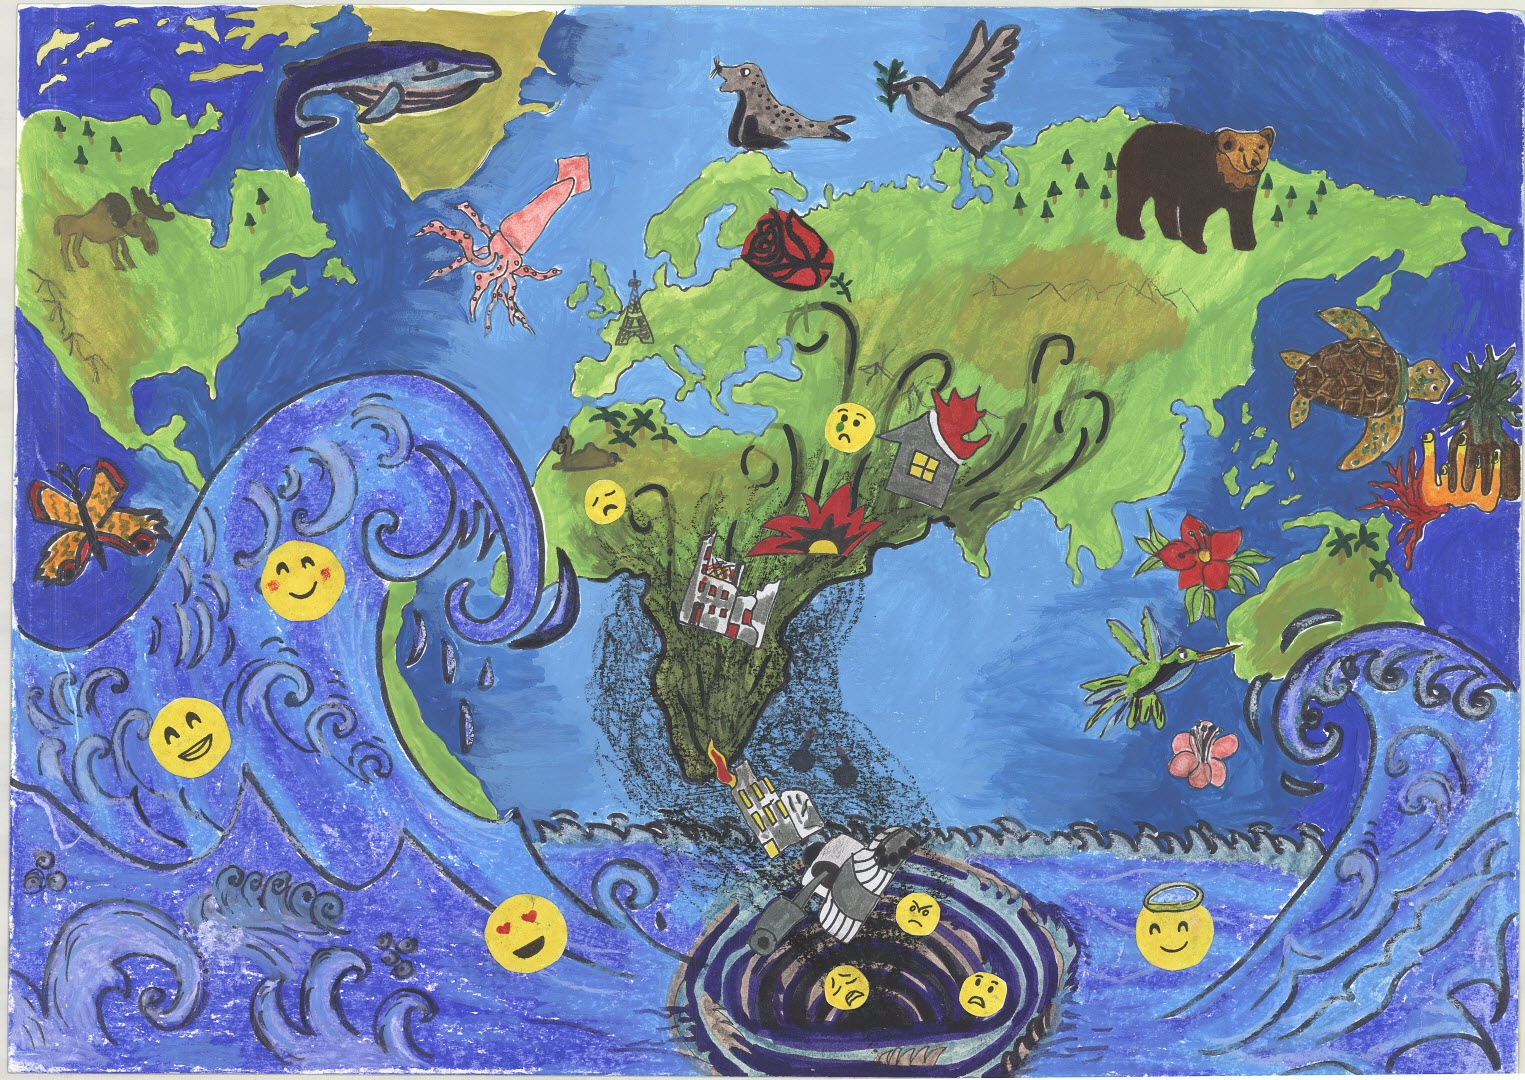 World map showing the biosphere - animals, oceans, greenery, flowers